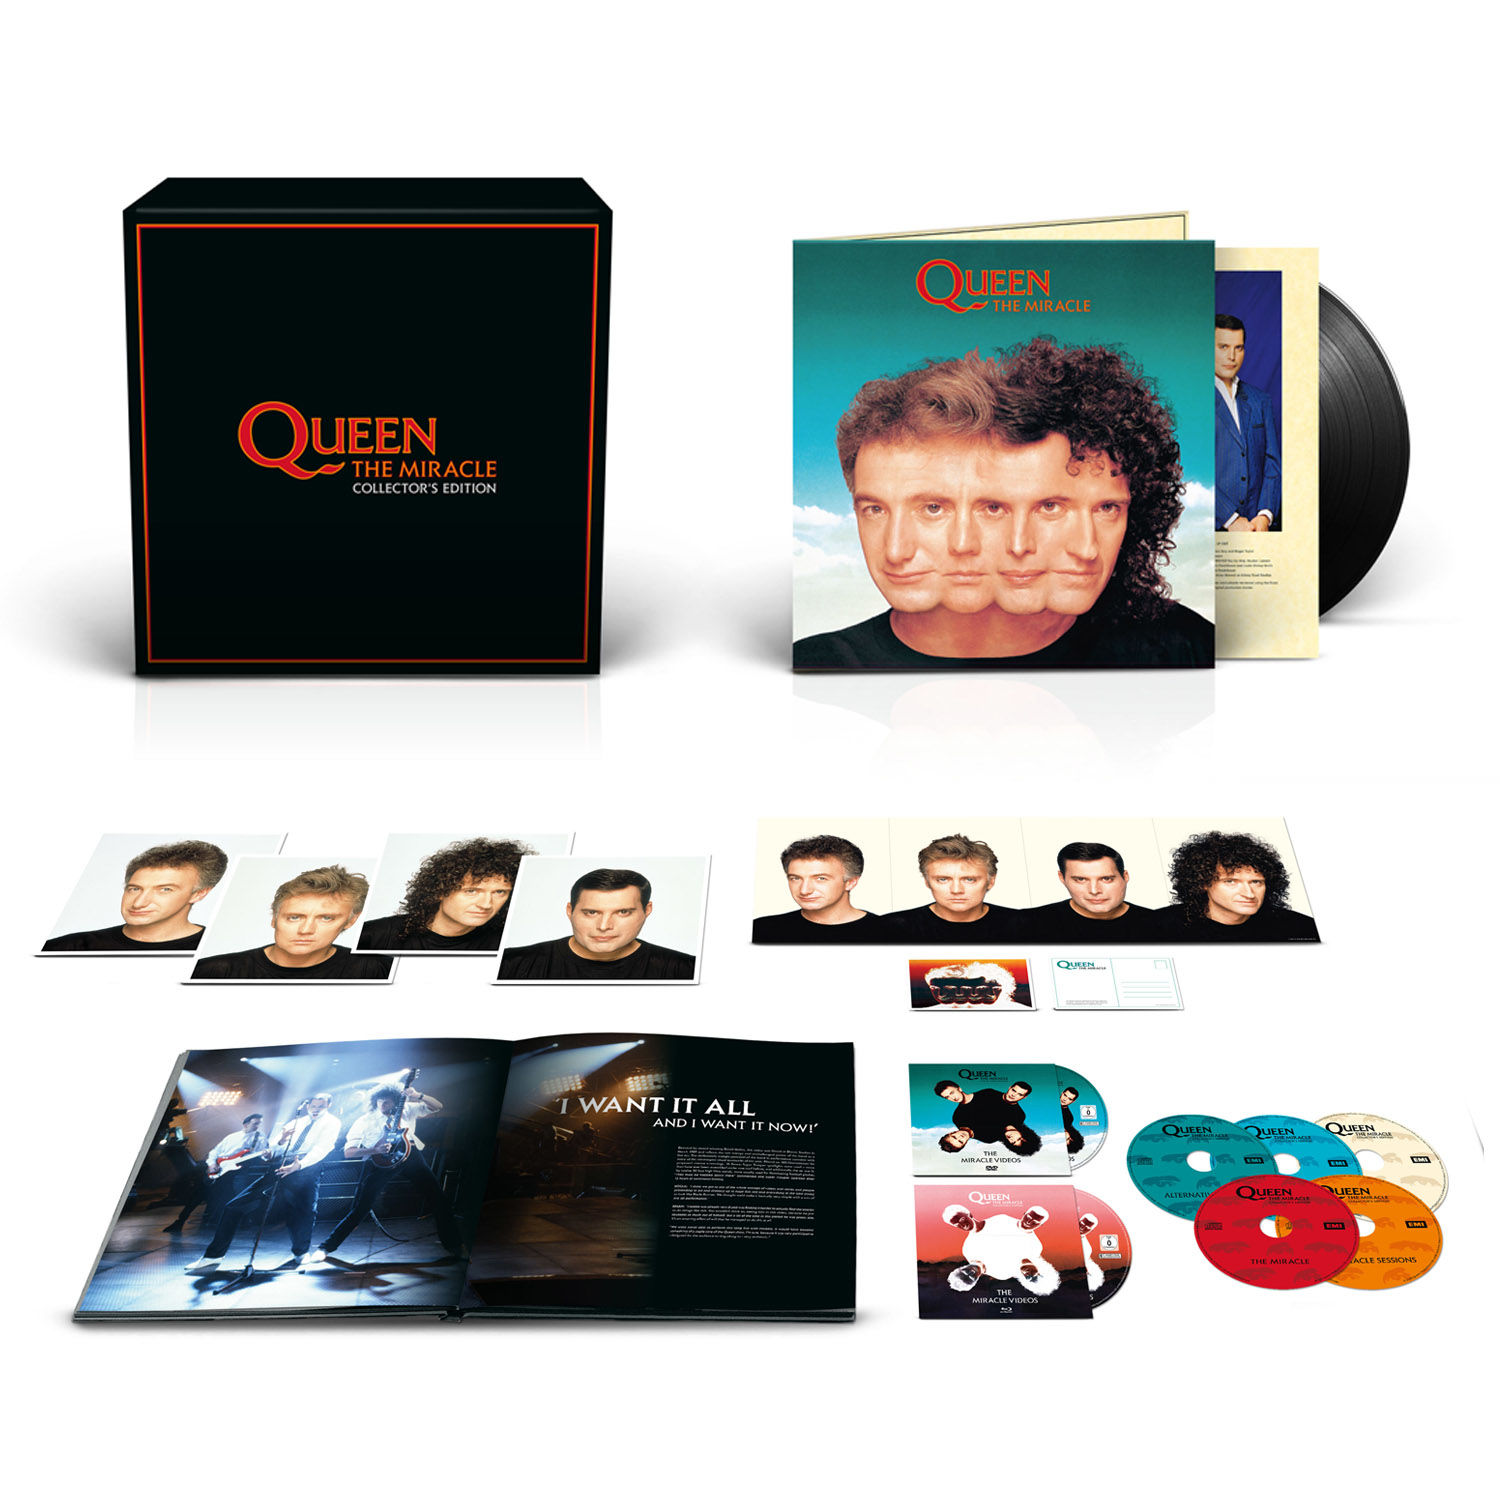 Queen - The Miracle (Super Deluxe Collector’s Edition)